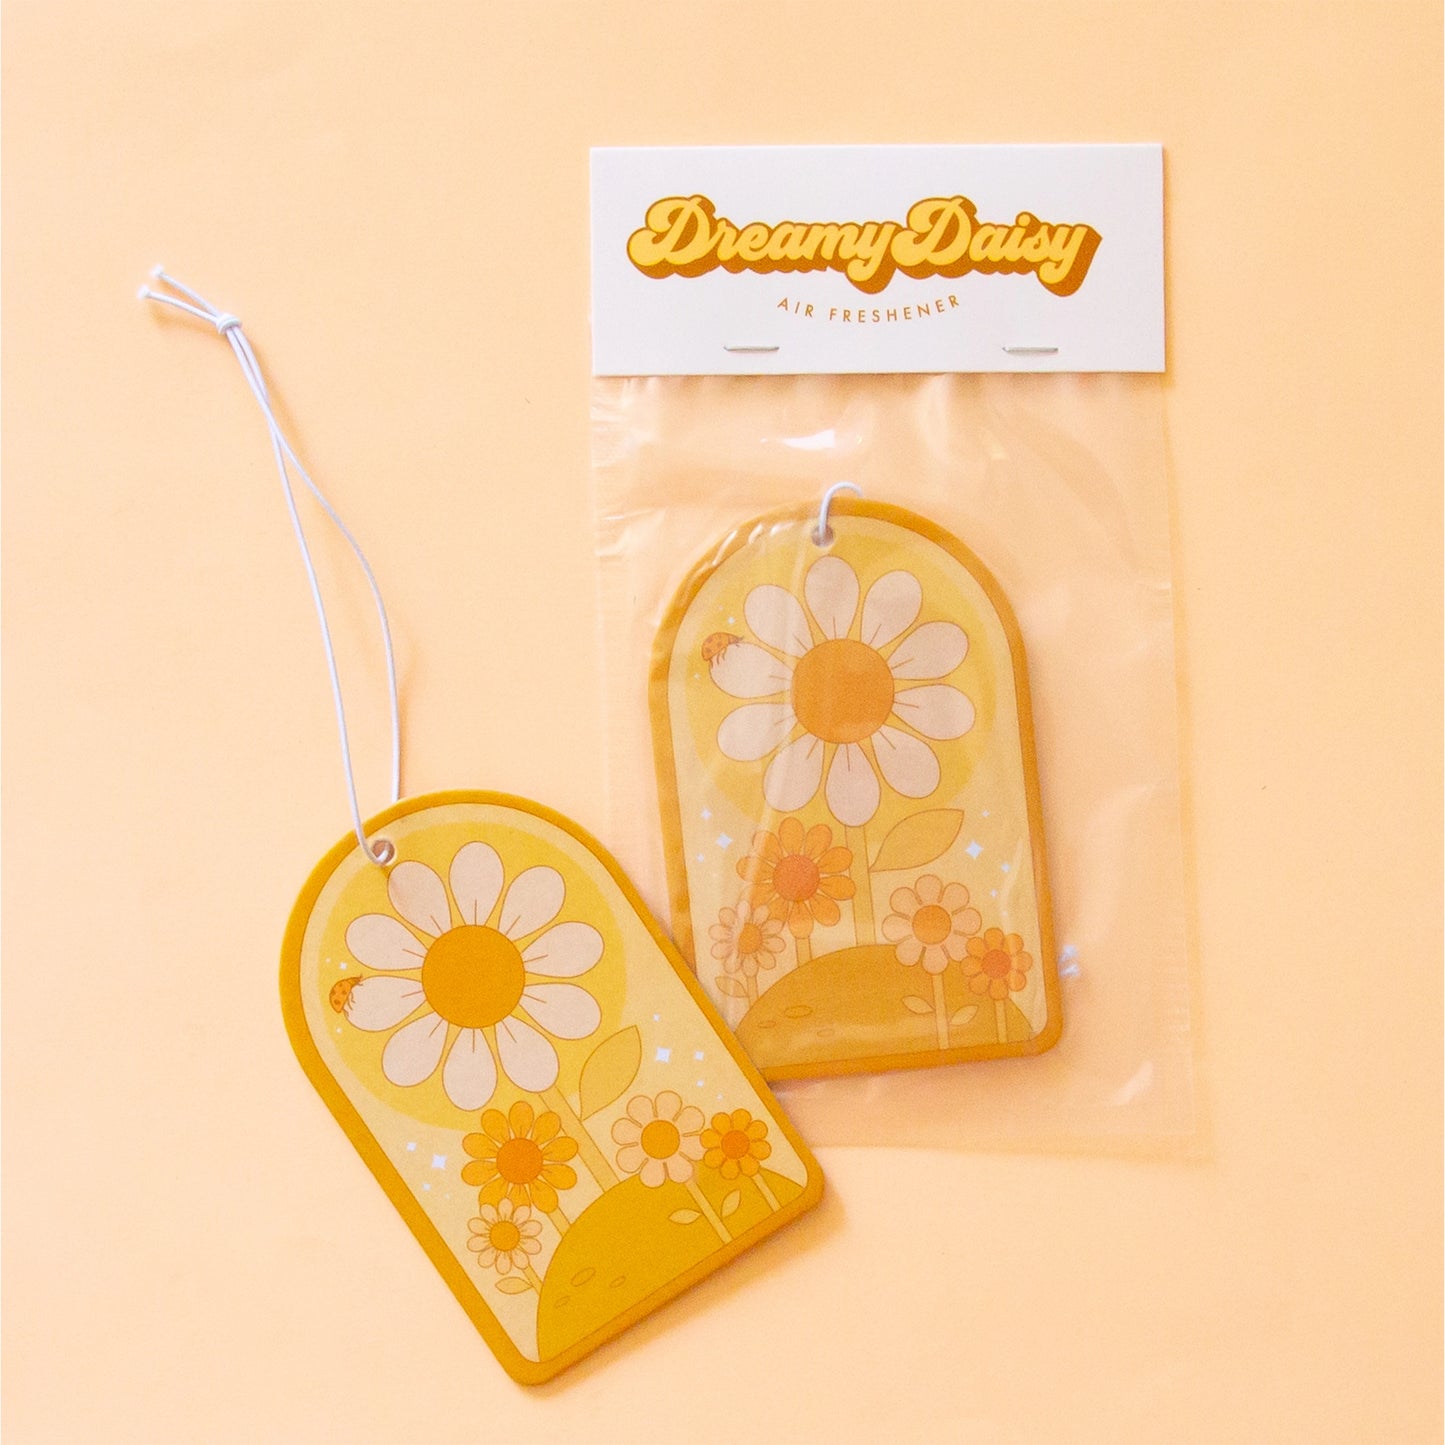 On a peachy background is an arched shaped air freshener with daisy designs and a white elastic loop for hanging. 